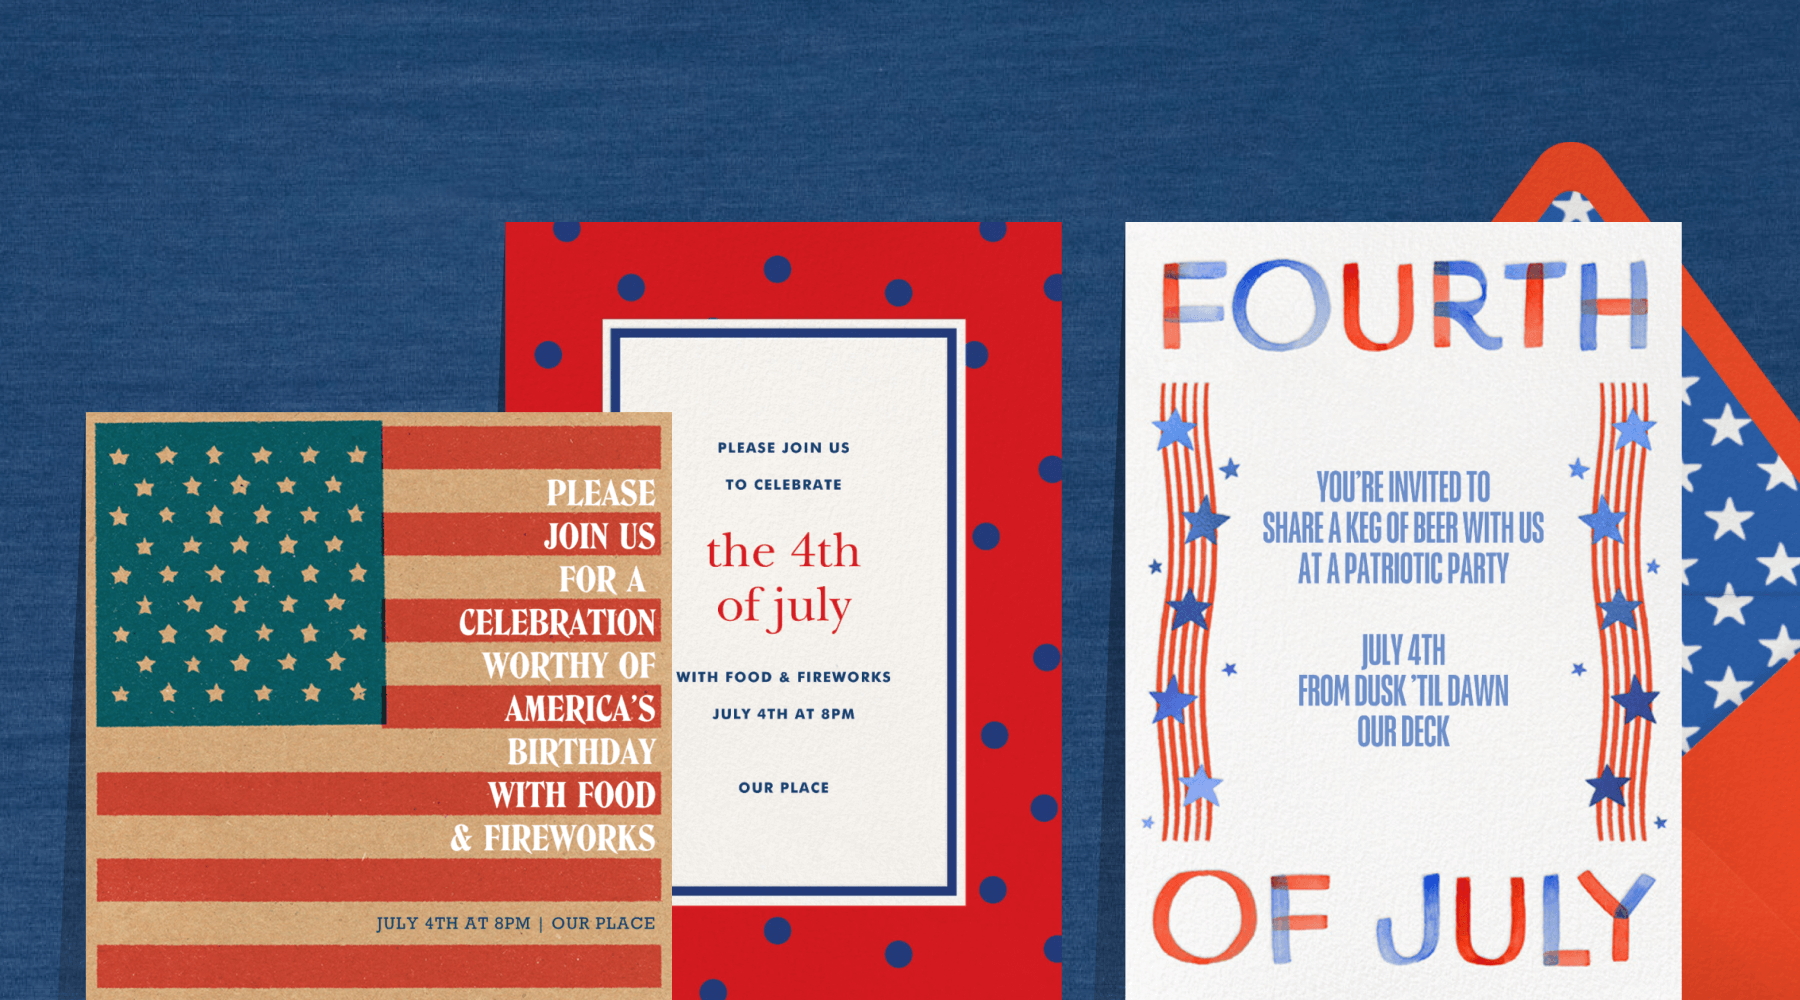 A square invitation that looks like an antique American flag; an invitation with a red border with blue polka dots; an invitation that reads FOURTH OF JULY in red and blue with star-spangled banners as a border beside a red envelope with blue star liner.